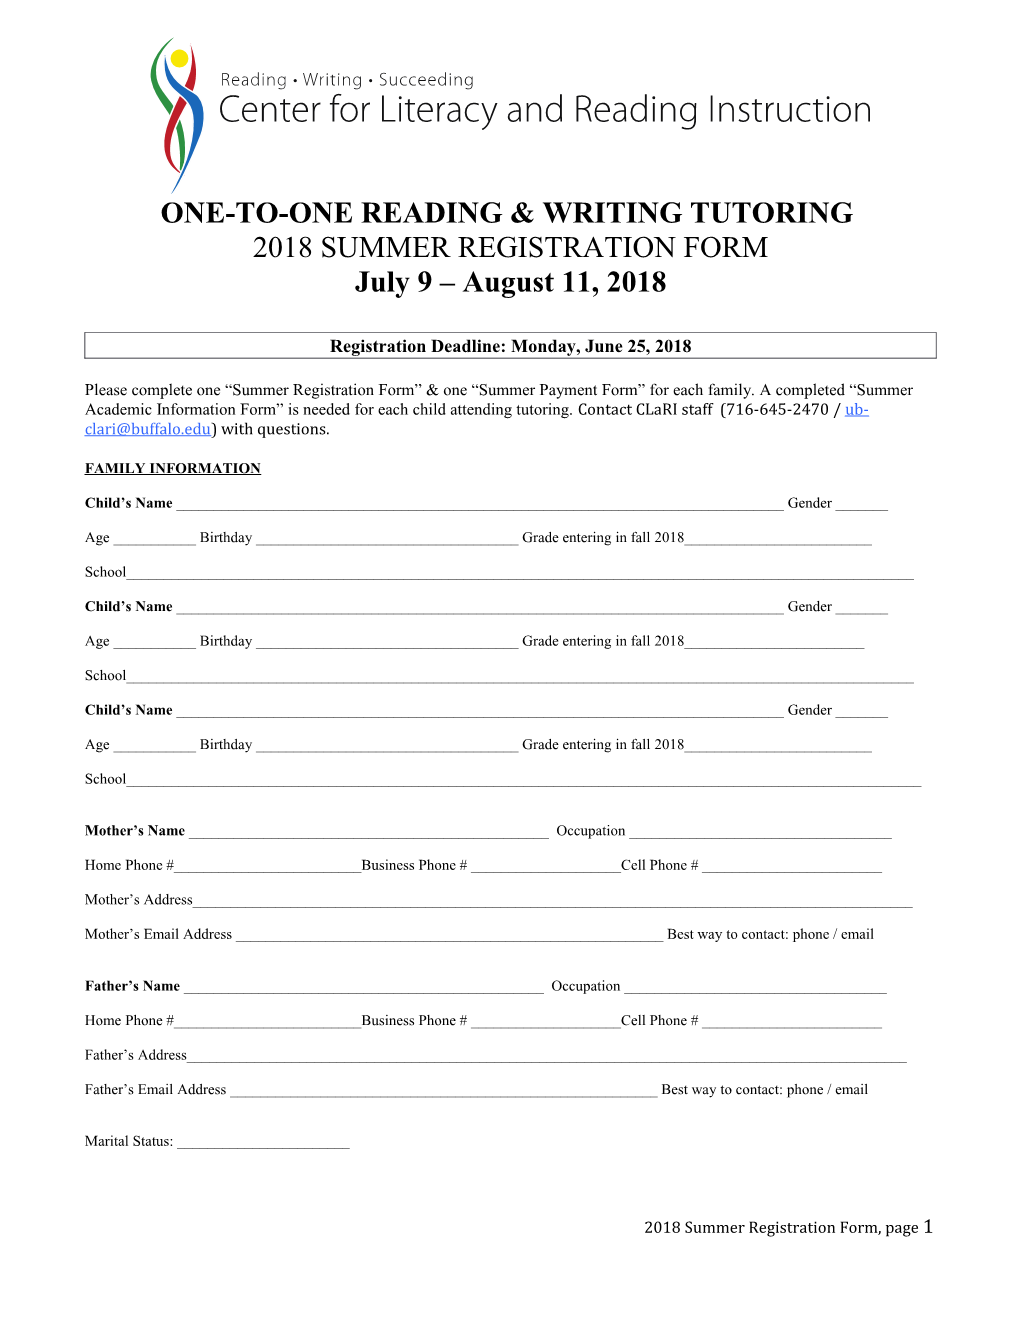 One-To-One Reading & Writing Tutoring